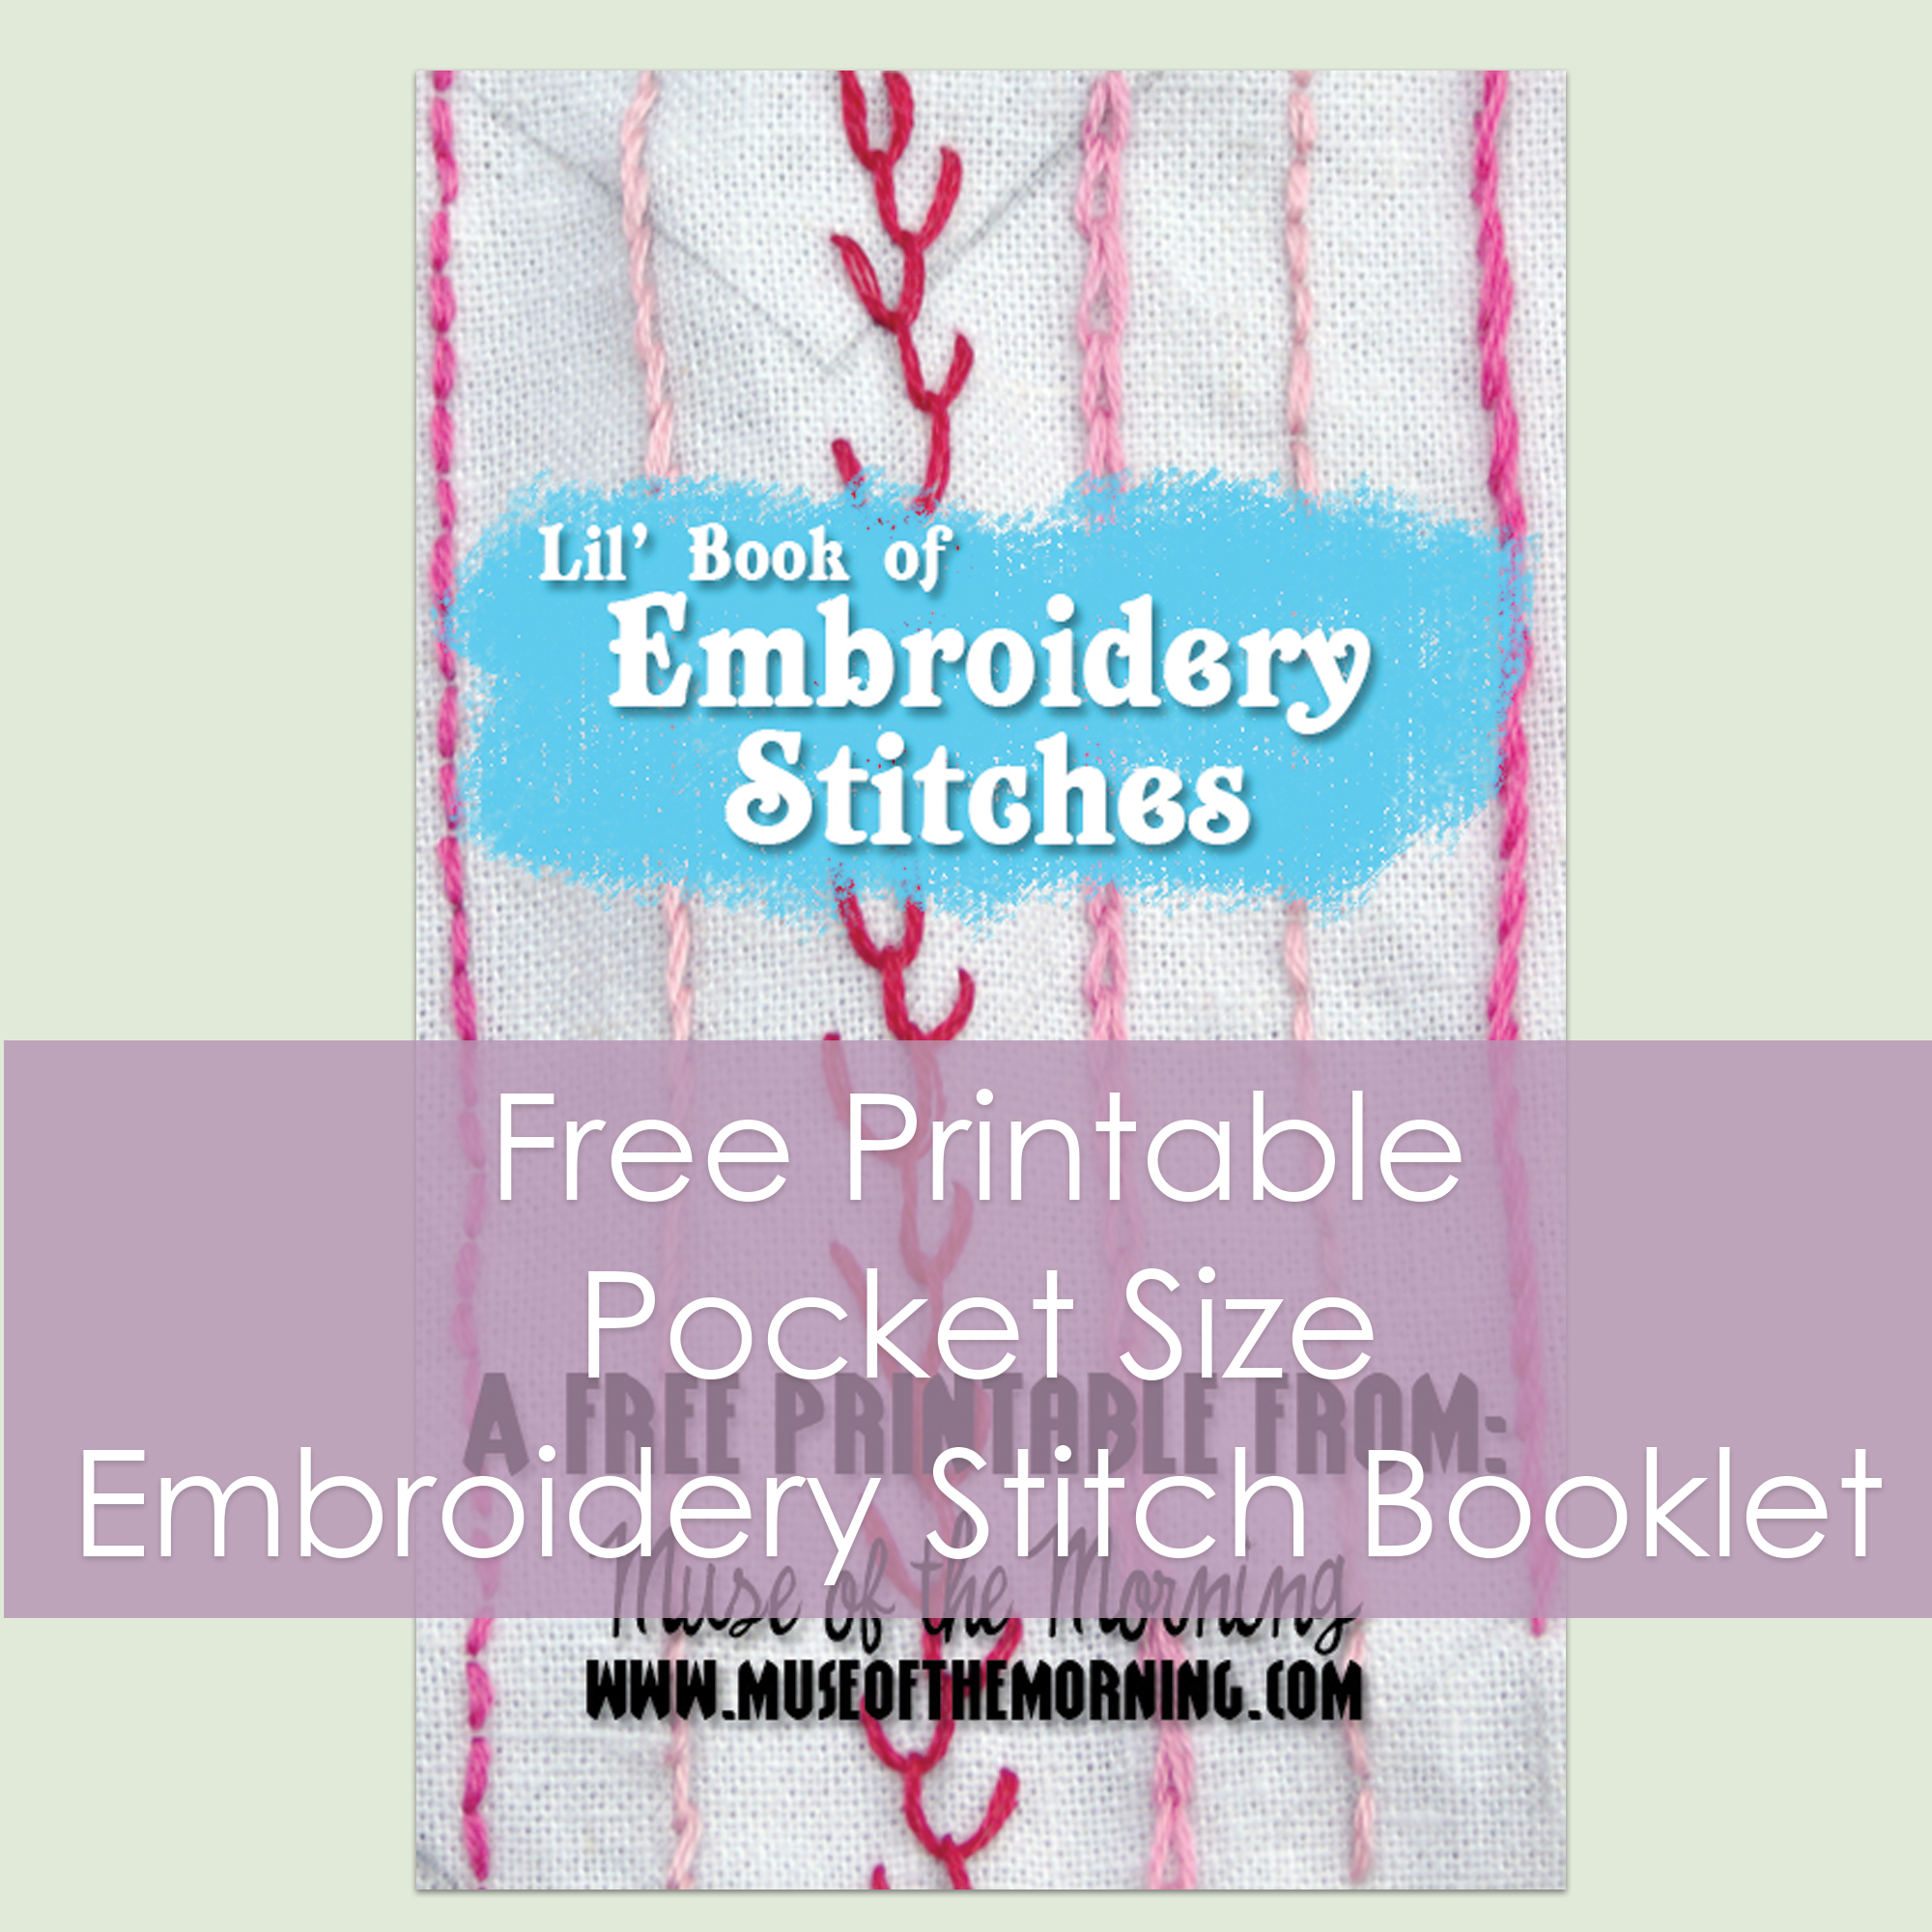 Free Printable Pocket Size Embroidery Stitch Booklet from Muse of the Morning